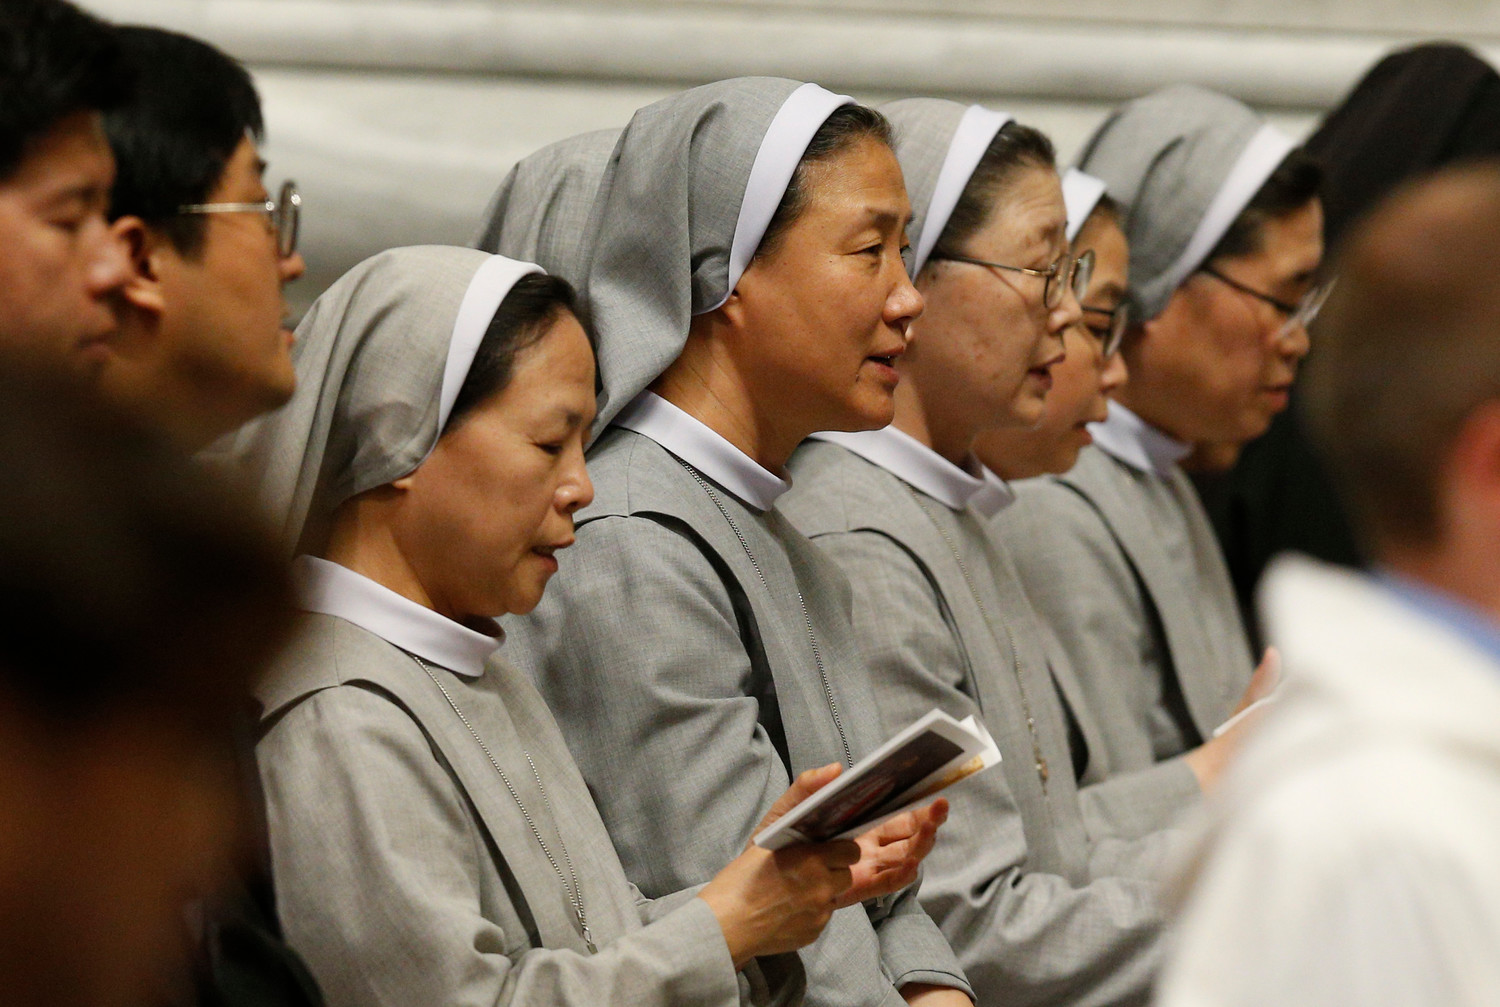 Nuns attend a Mass for peace for the Korean peninsula in St. Peter’s Basilica at the Vatican Oct. 17. The Mass was celebrated by Cardinal Pietro Parolin, Vatican secretary of state, and attended by South Korean President Moon Jae-in.